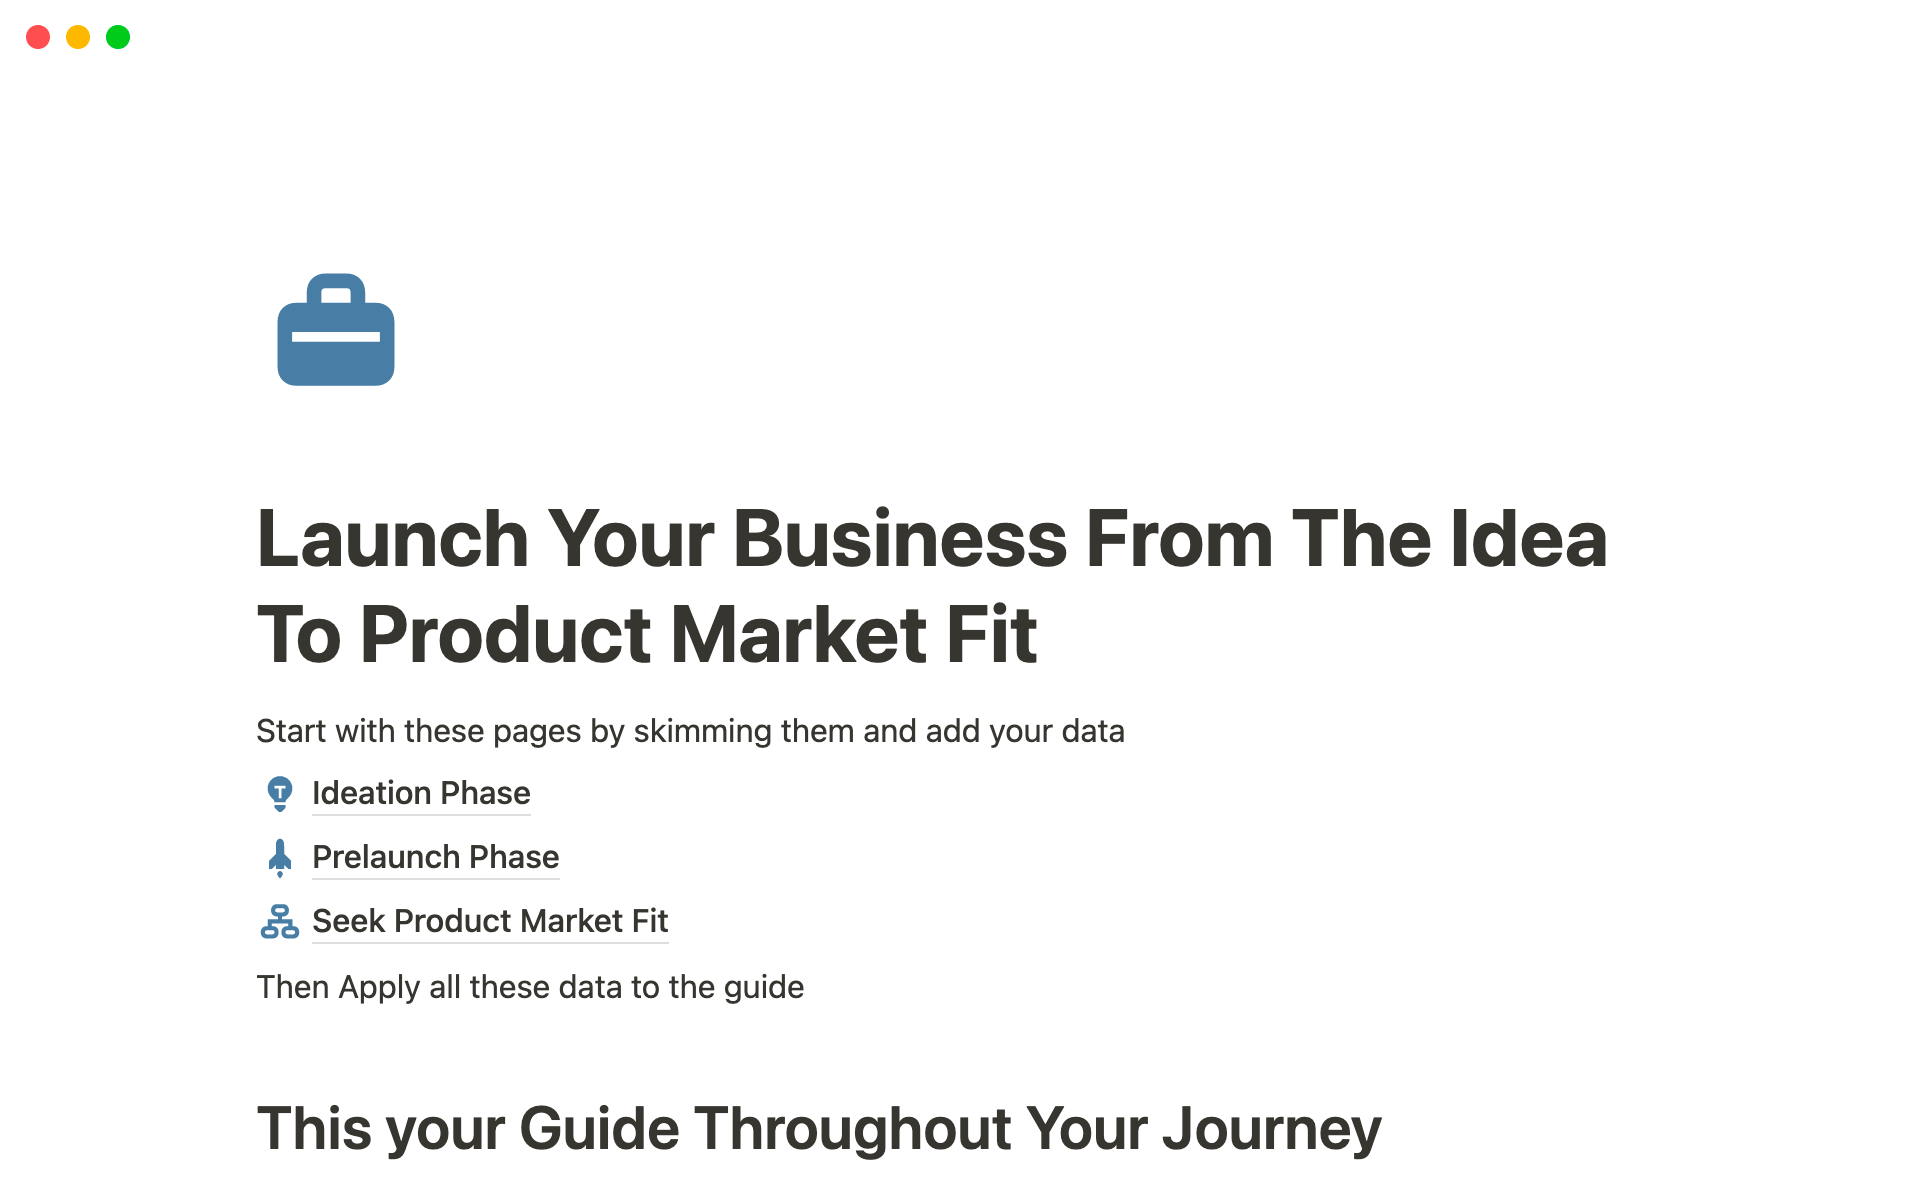 En forhåndsvisning av mal for Launch Your Business From The Idea To Product Market Fit